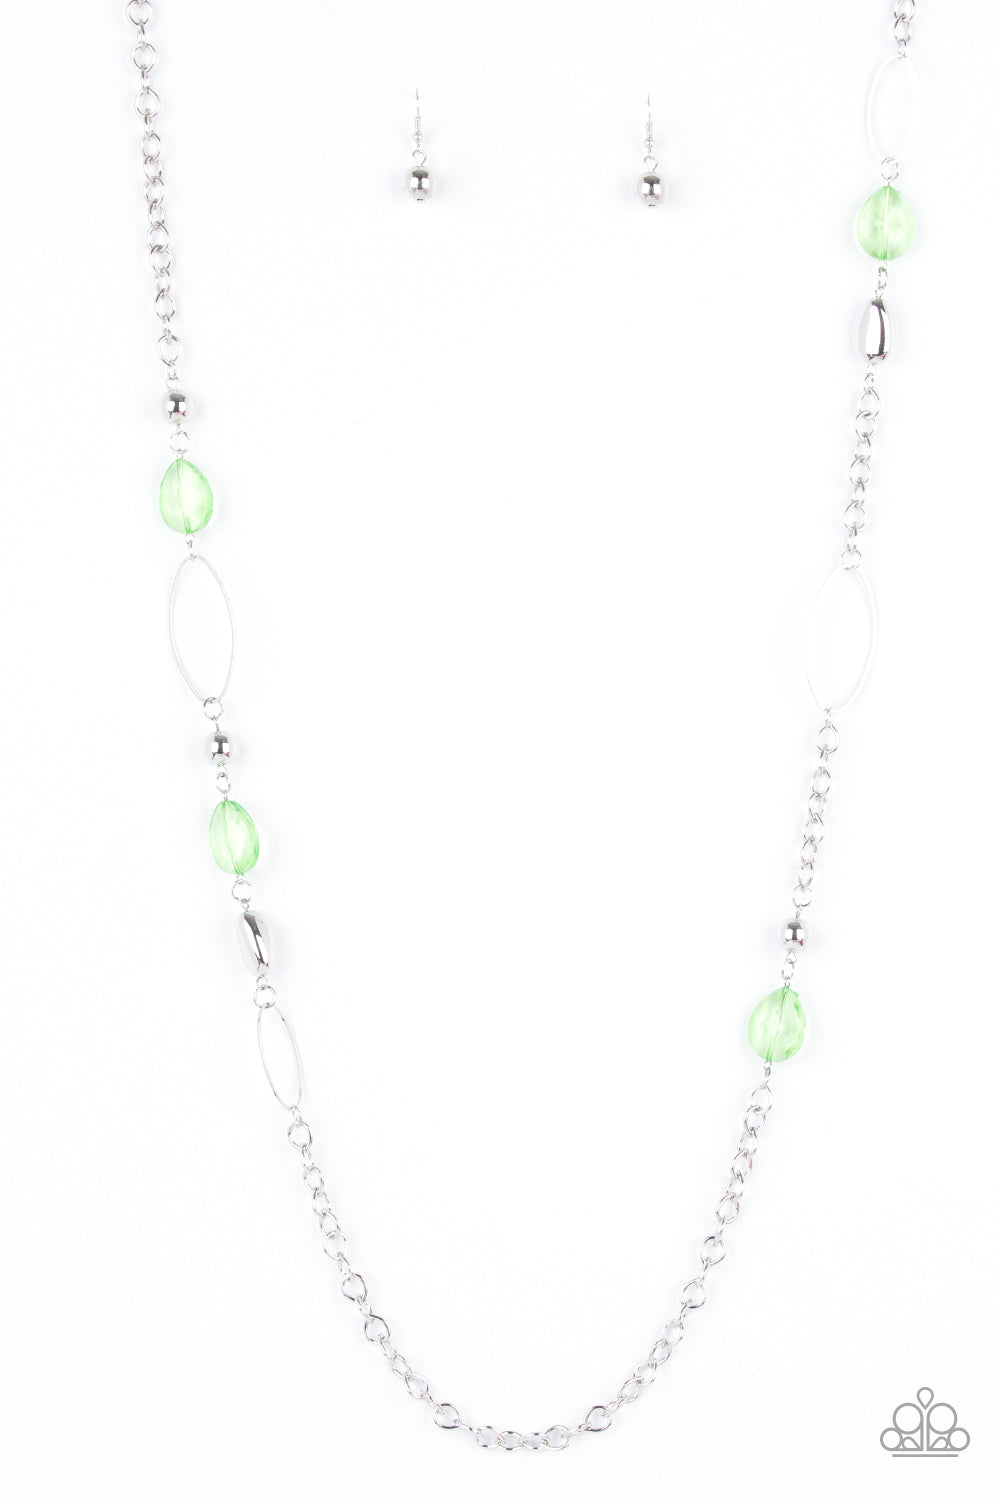 SHEER As Fate - Green and Silver Necklace - Paparazzi Accessories Long Necklaces Bejeweled Accessories By Kristie Featuring Paparazzi Jewelry - Trendy fashion jewelry for everyone -